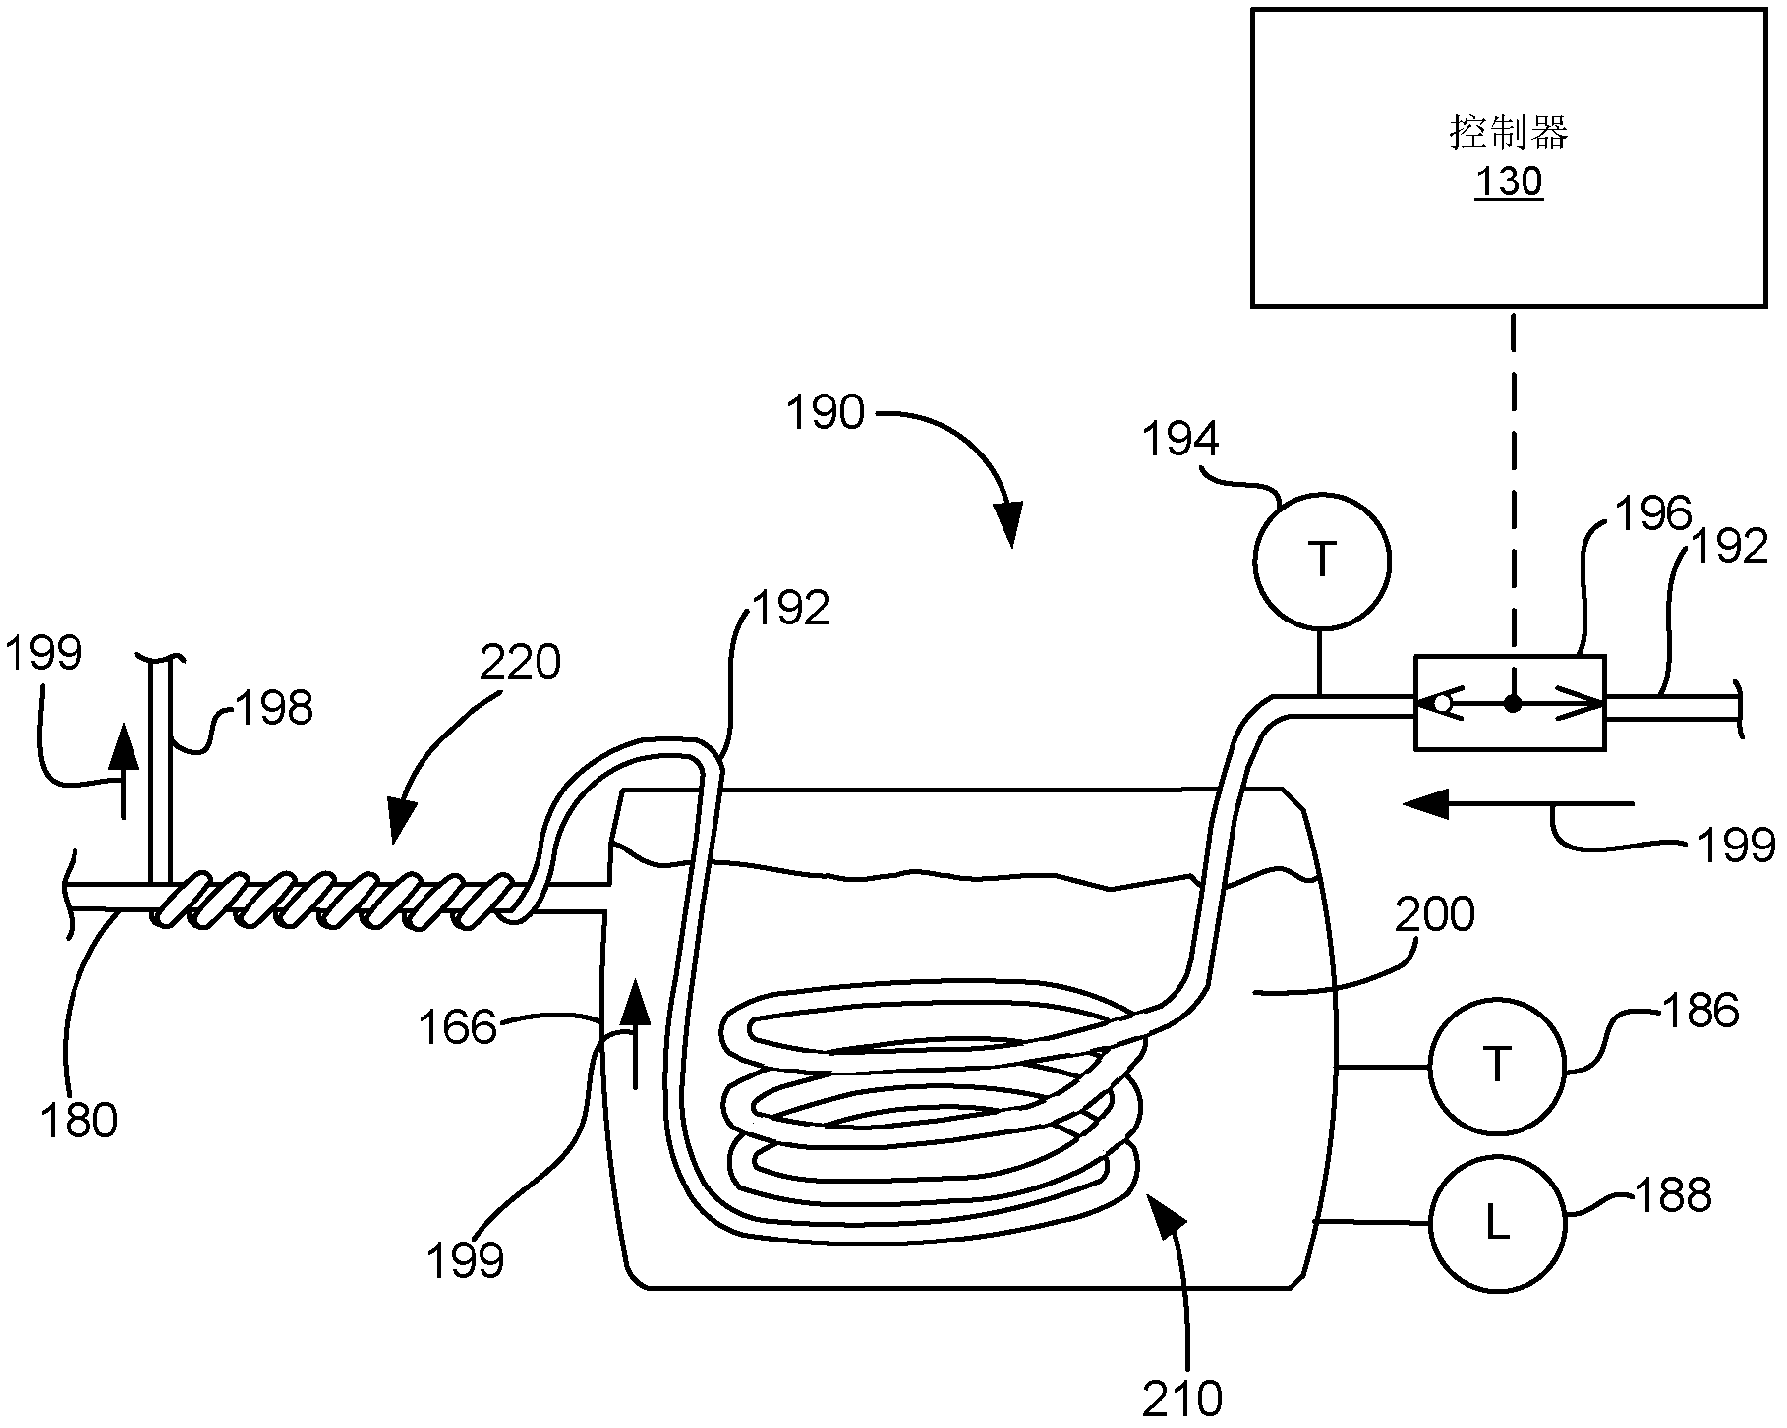 Apparatus, system, and method for reductant line heating control